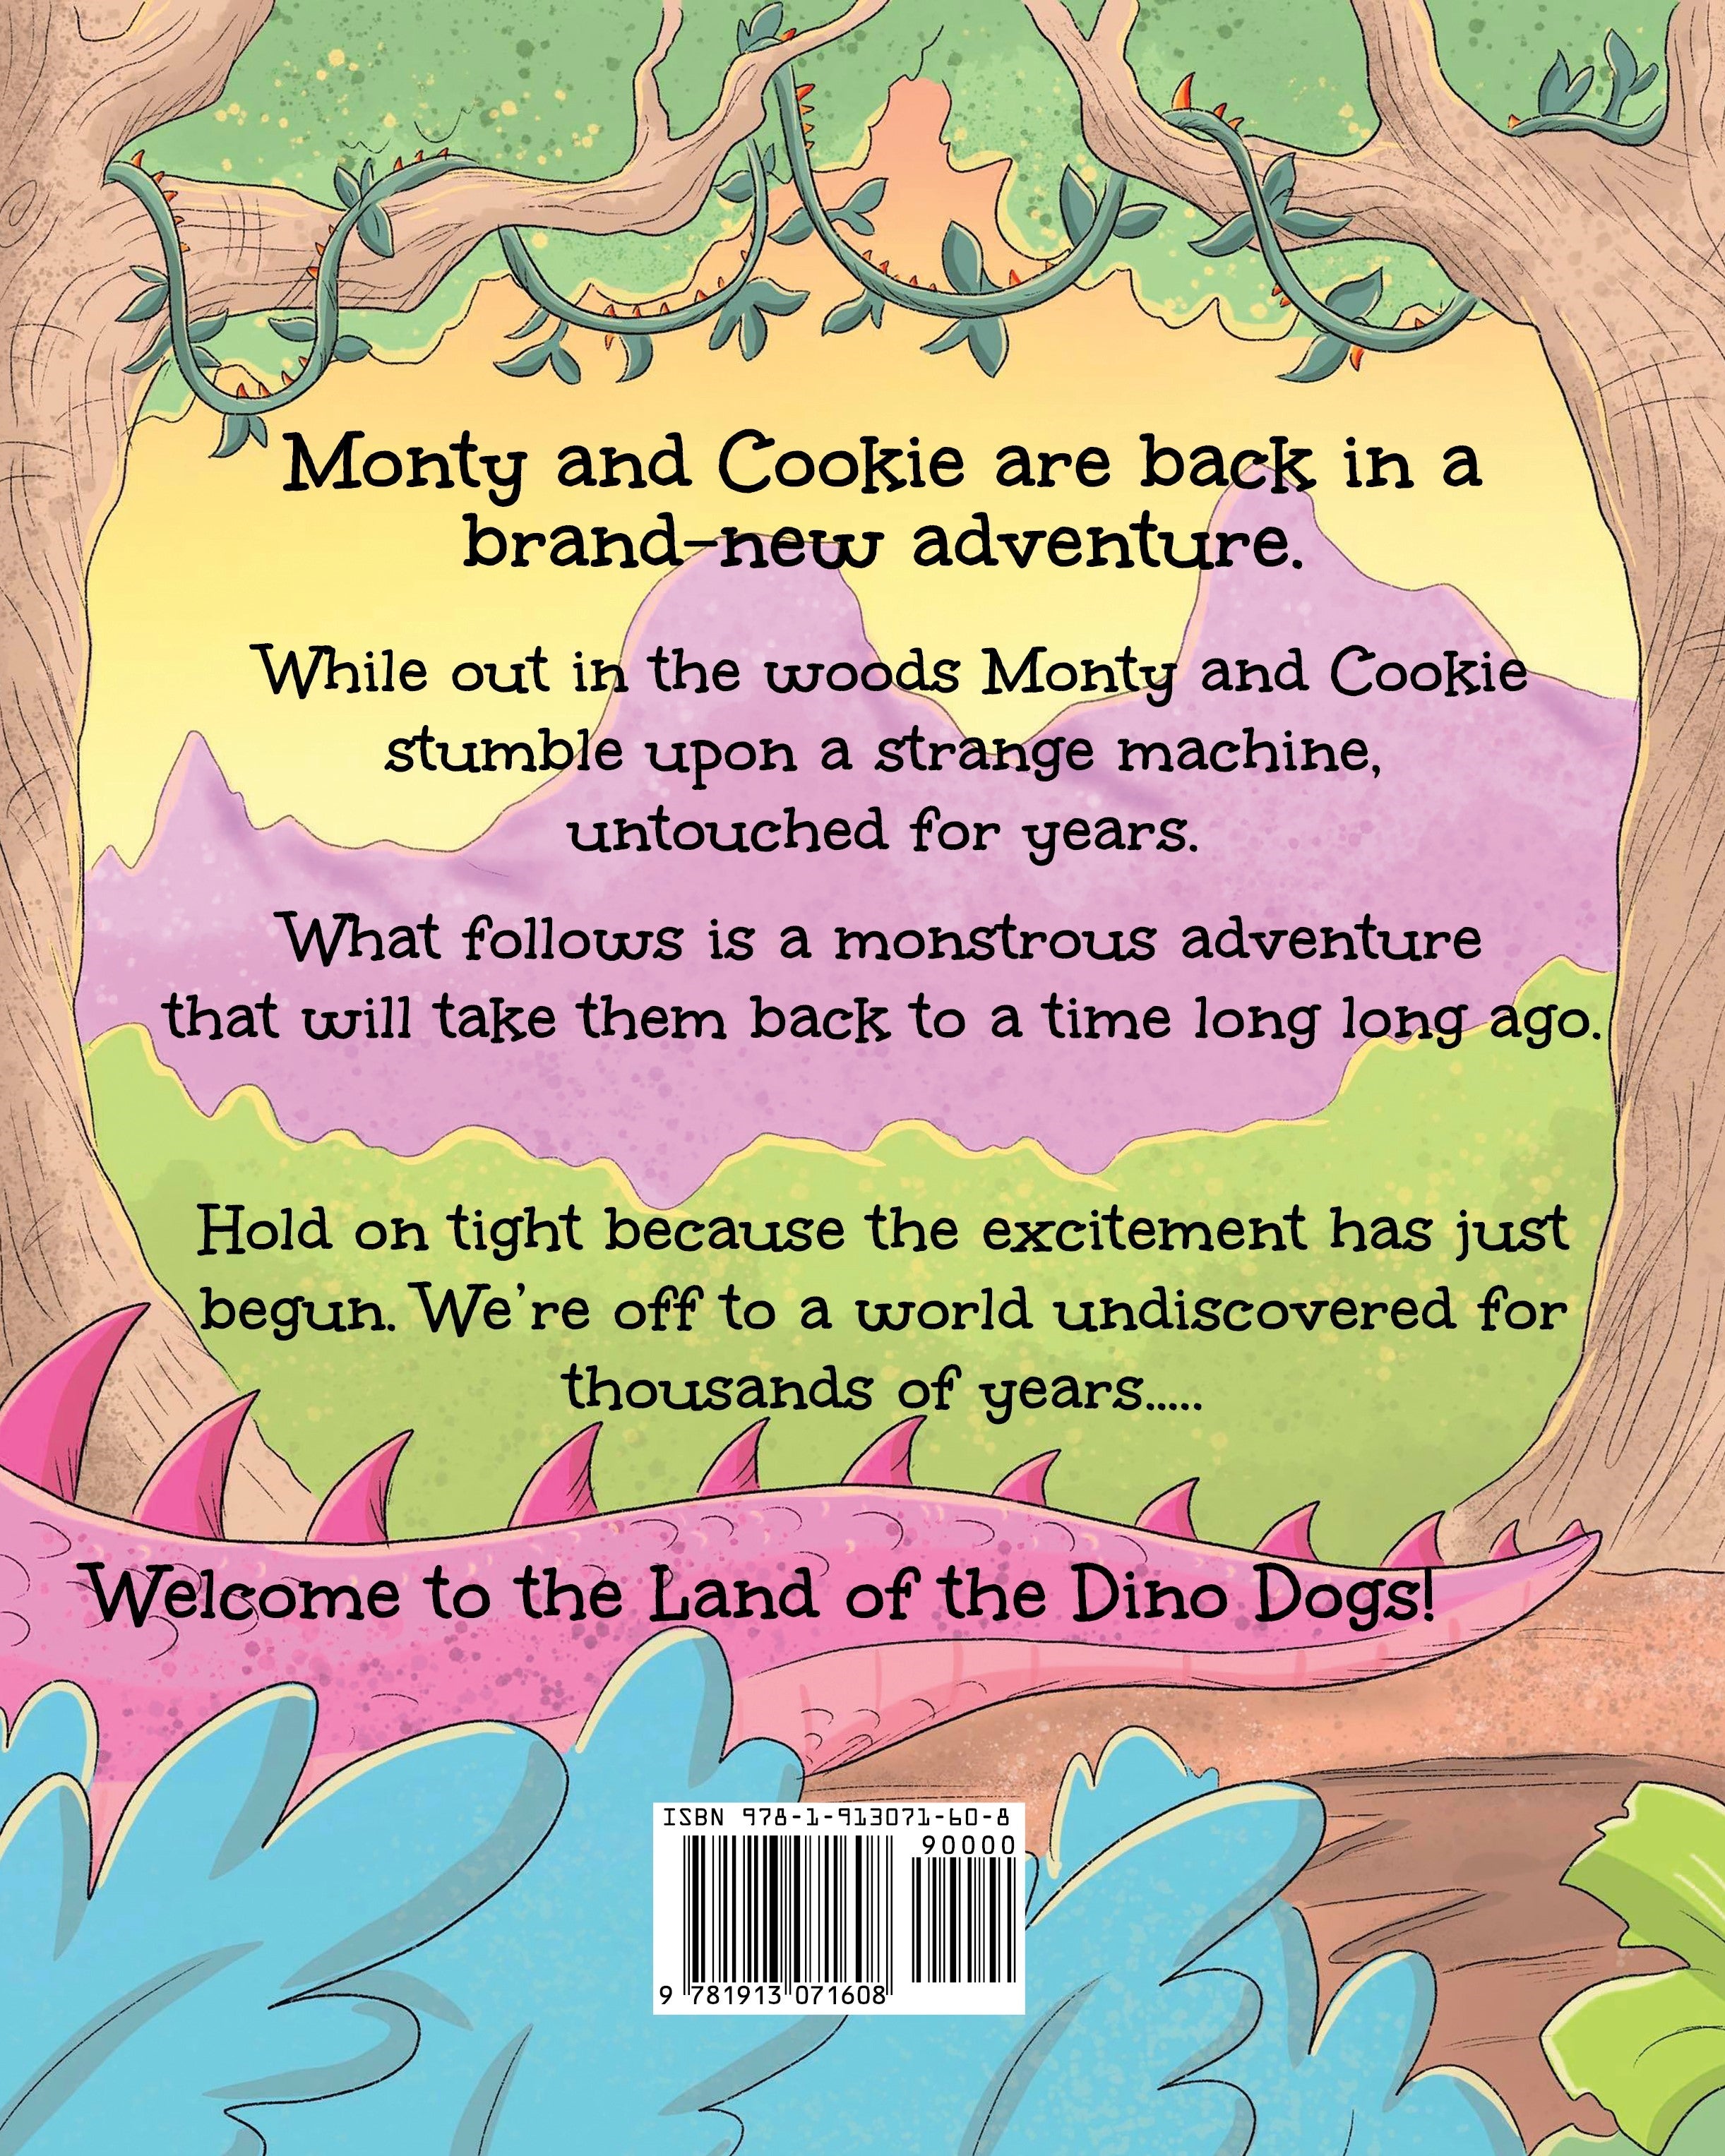 Monty and the land of the DINODOGS